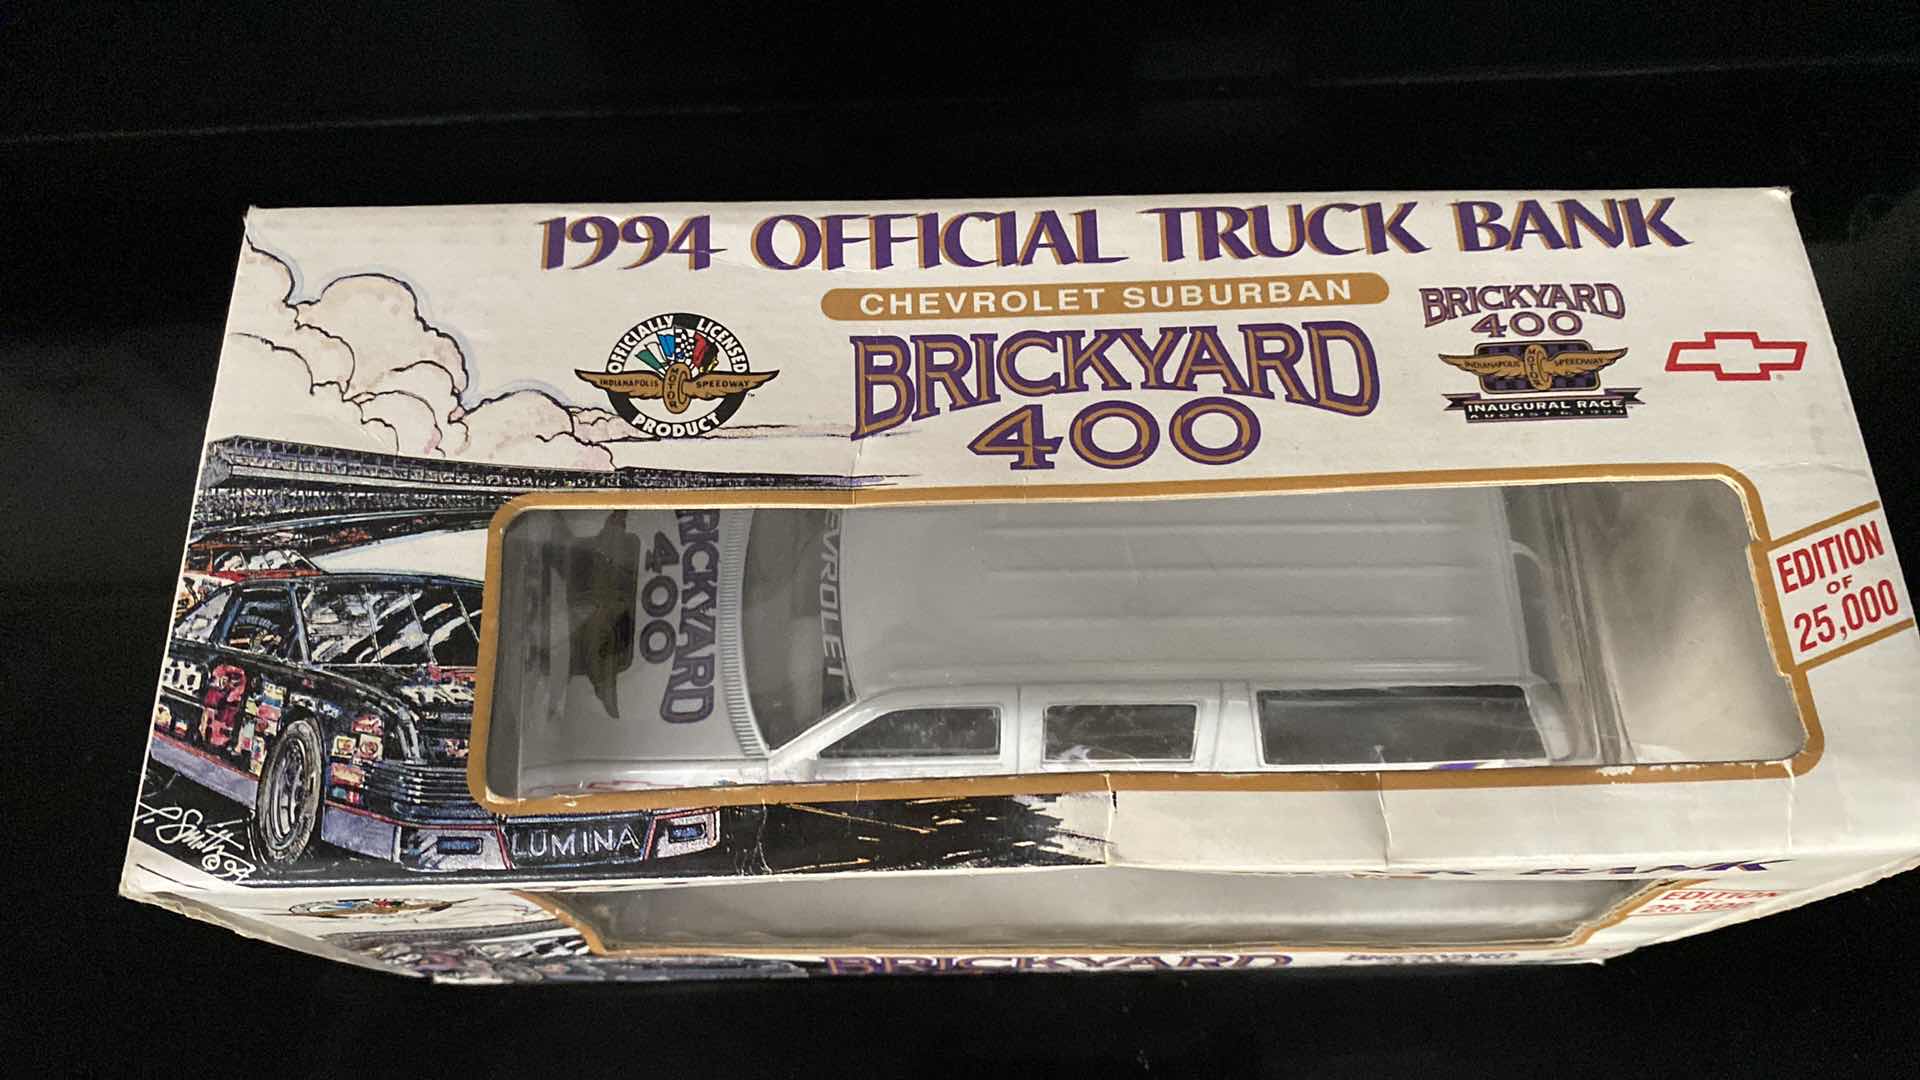 Photo 2 of VINTAGE 1994 BRICKYARD 400 LIMITED EDITION INAUGURAL RACE OFFICIAL TRUCK BANK CHEVROLET SUBURBAN